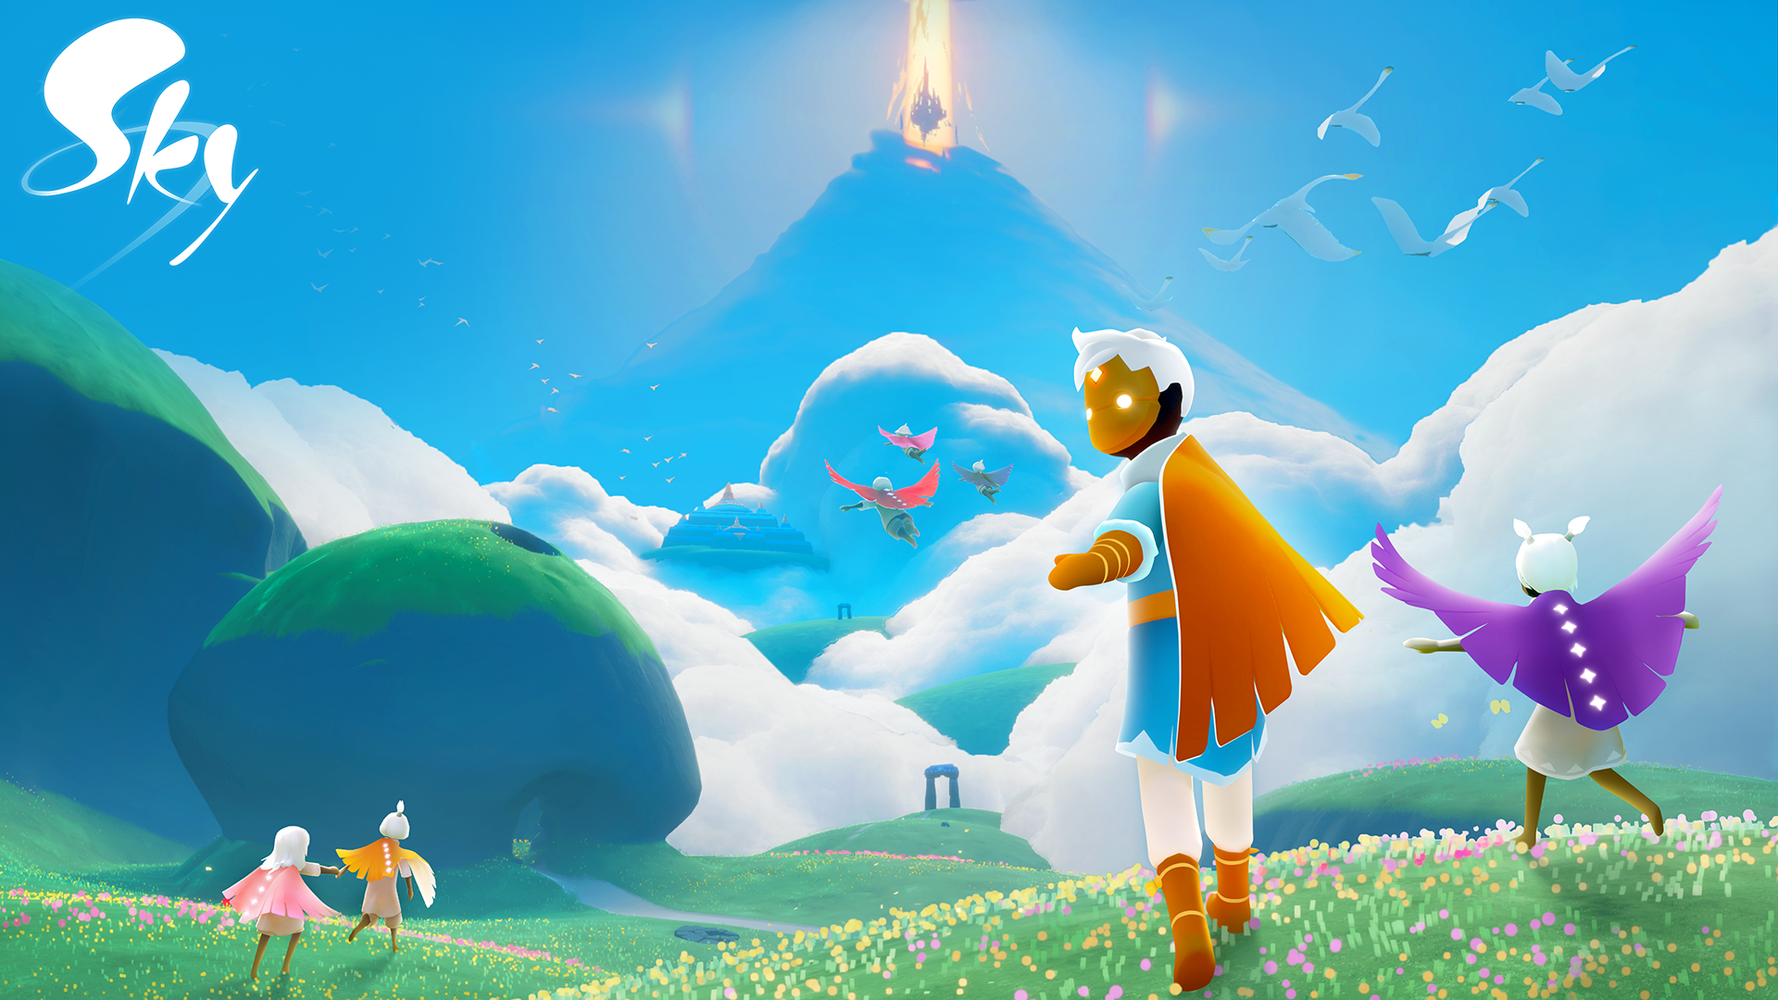 A Sky child wearing an orange cape reaches out to the viewer, while six other Sky children run and fly through Daylight Prairie